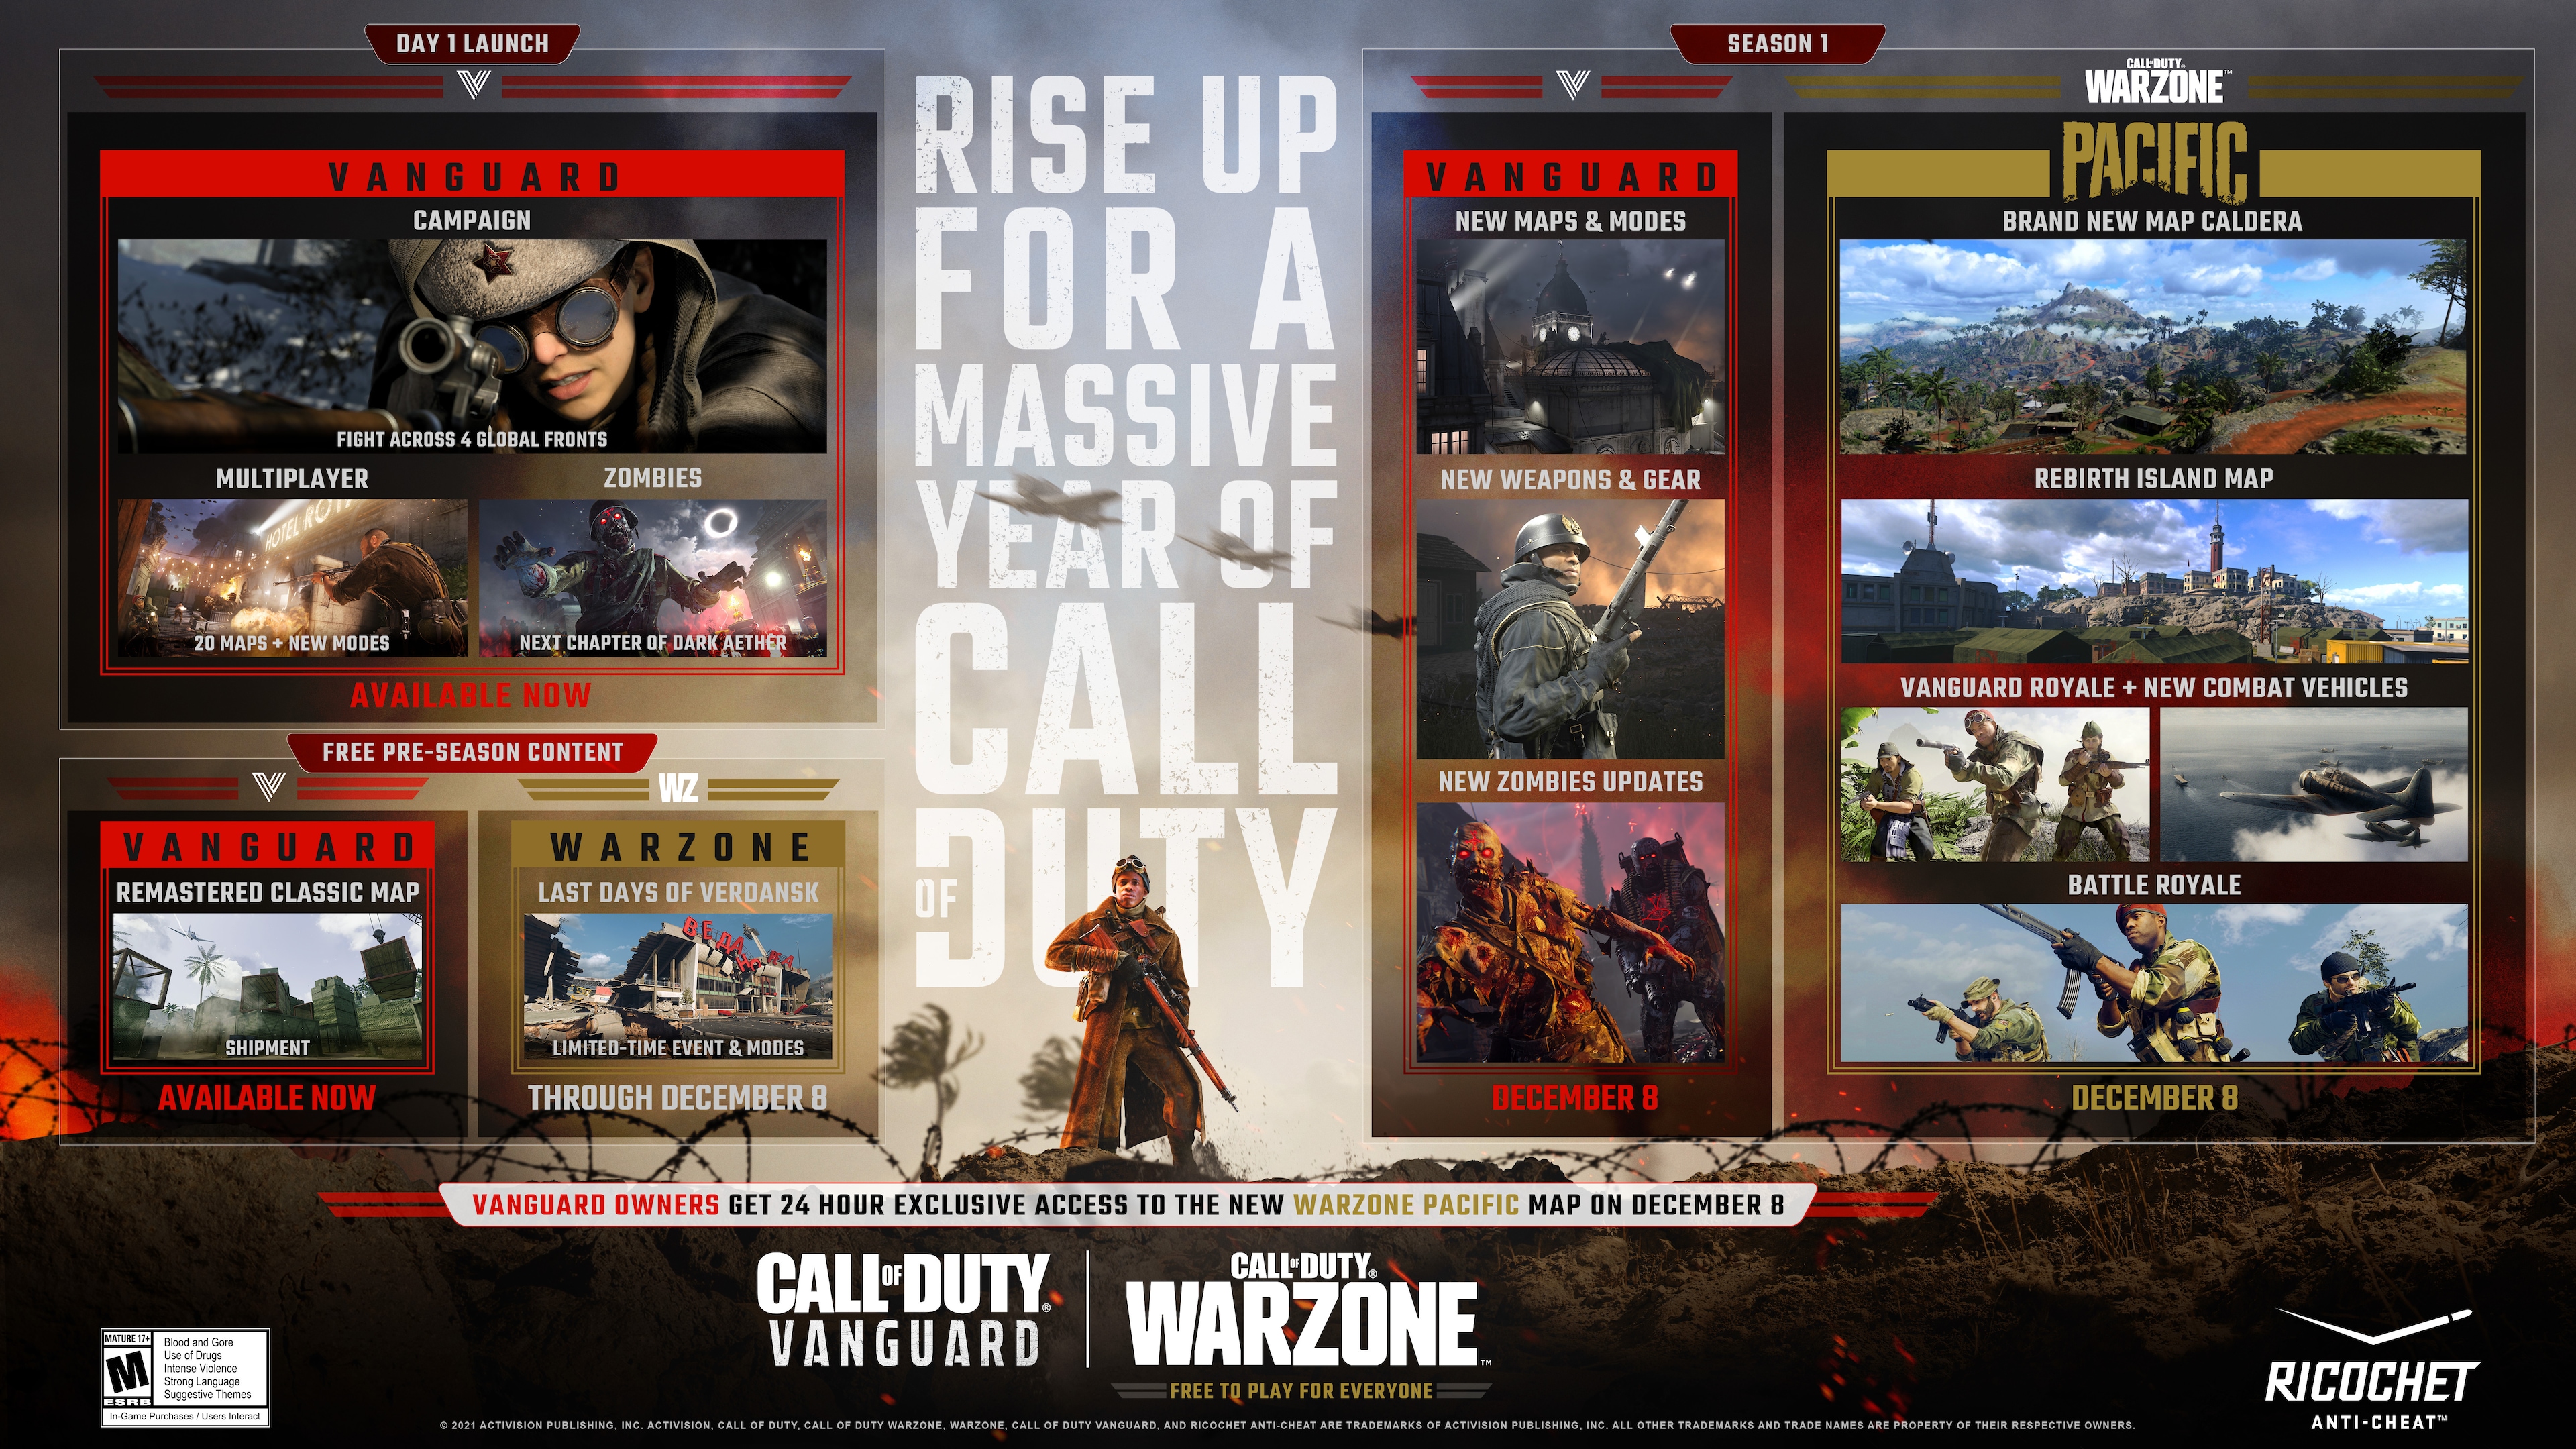 Call of Duty: Vanguard begins a massive year of content—everything